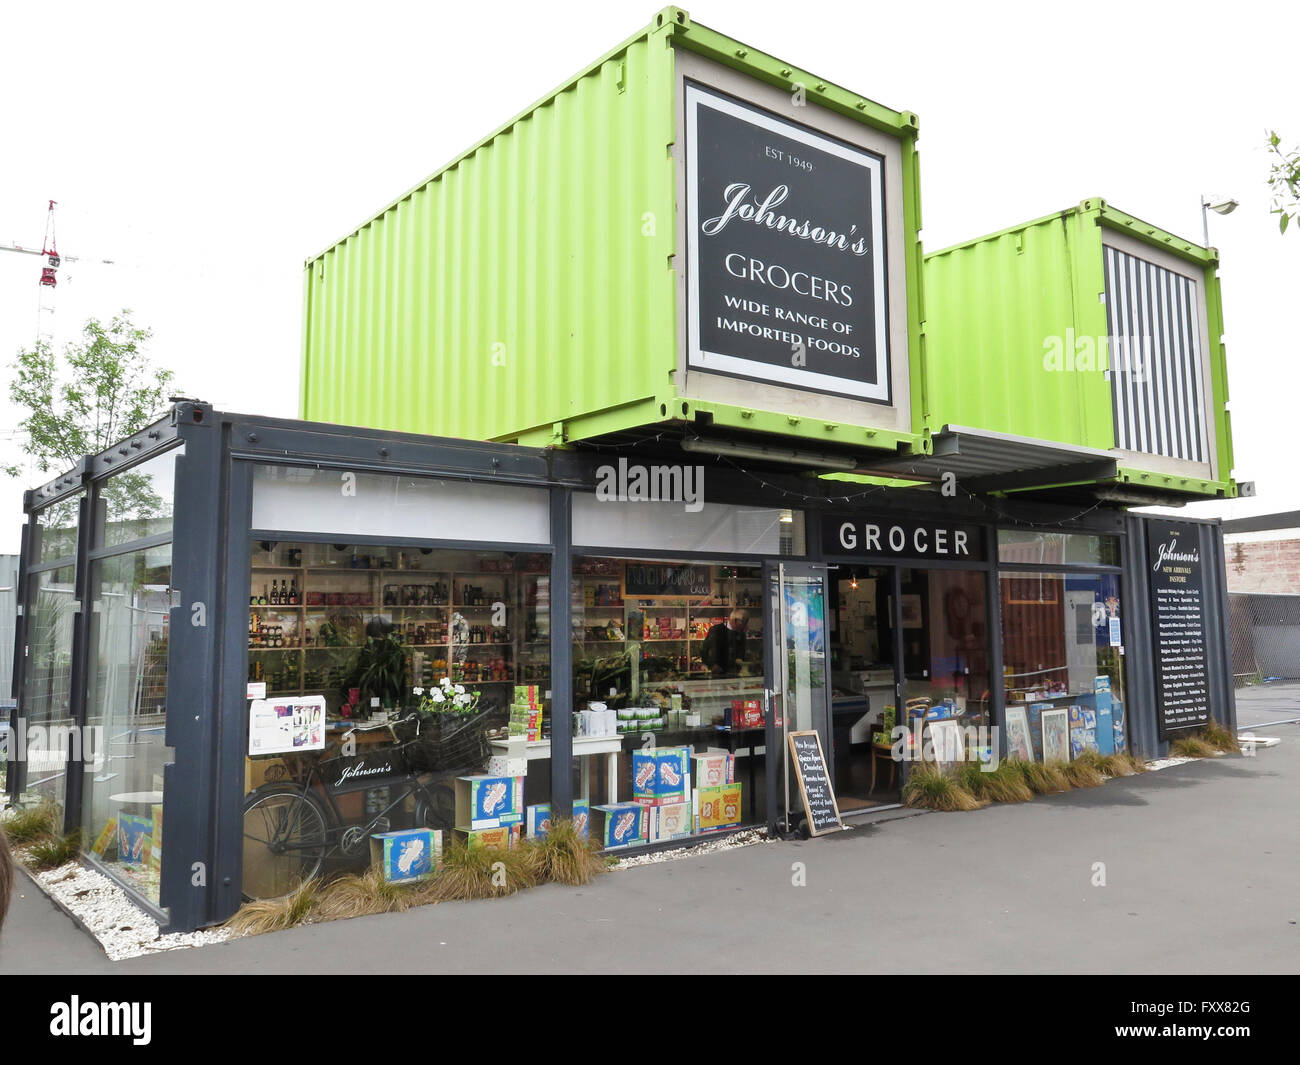 Restart, - Container city in Christchurch, South Island, New Zealand. Created after the devastating earthquake of 22nd February Stock Photo